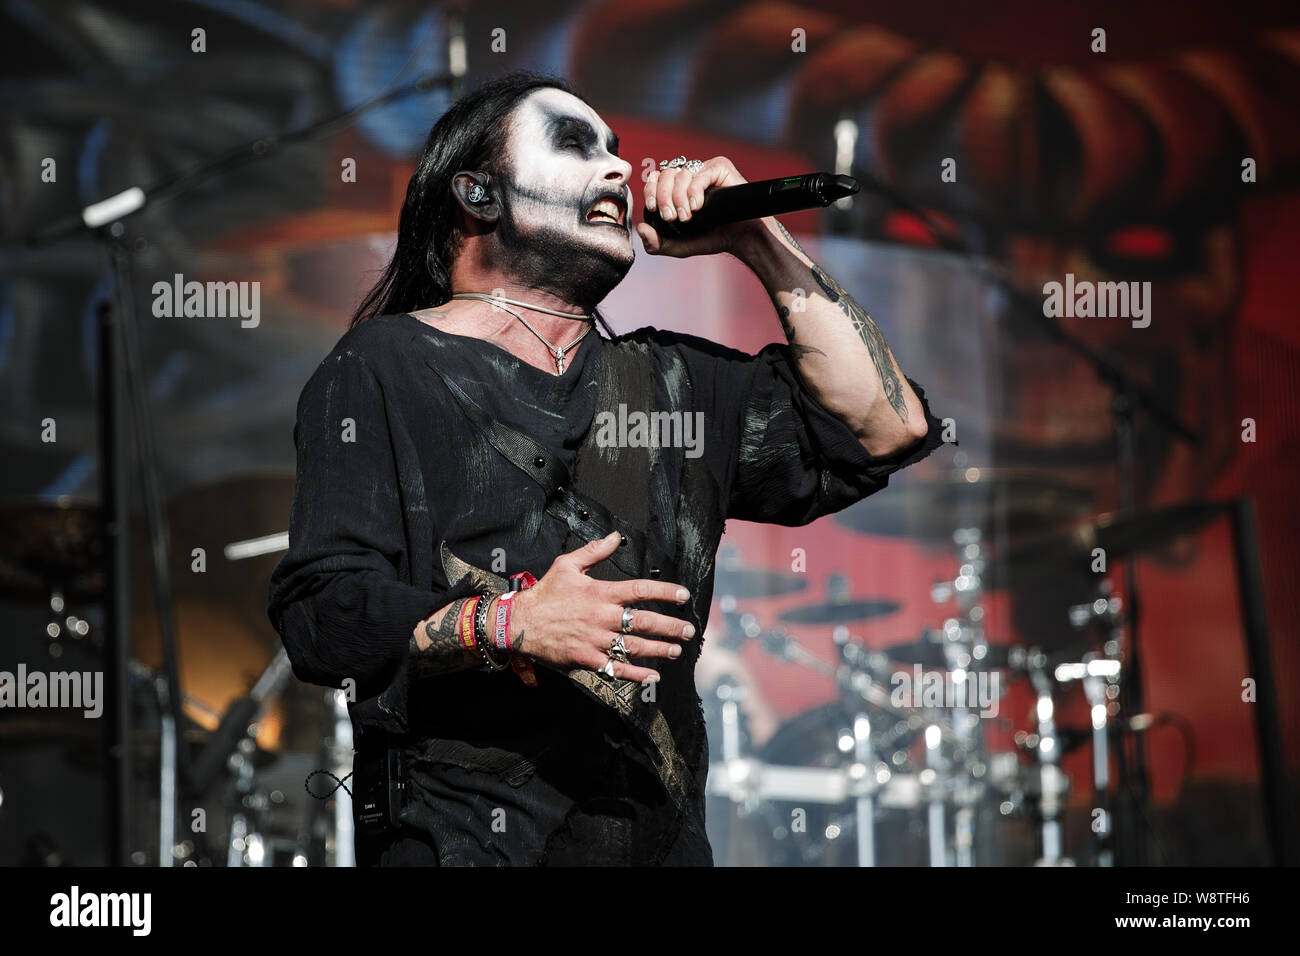 Cradle Of Filth perform live on stage at Bloodstock Open Air Festival, UK, 11th Aug, 2019. Stock Photo